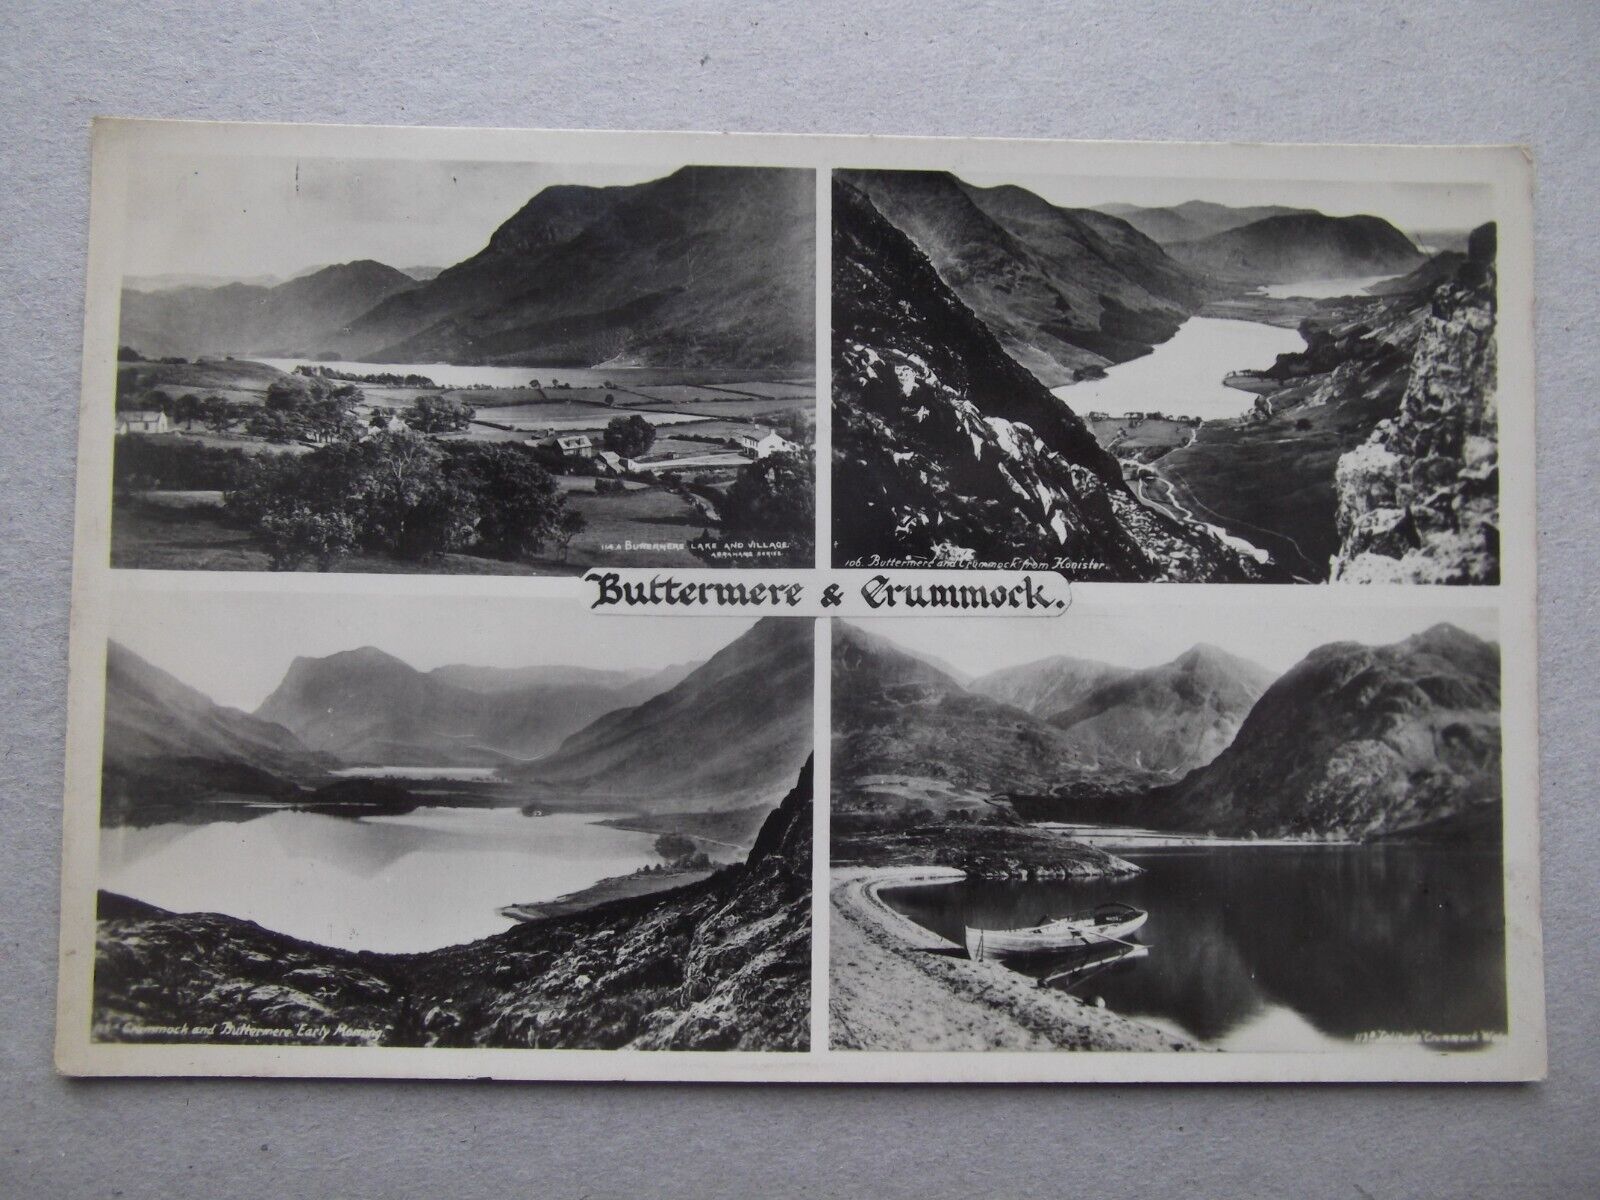 House Clearance - VINTAGE G P ABRAHAM POSTCARD LAKE DISTRICT - BUTTERMERE & CRUMMOCK